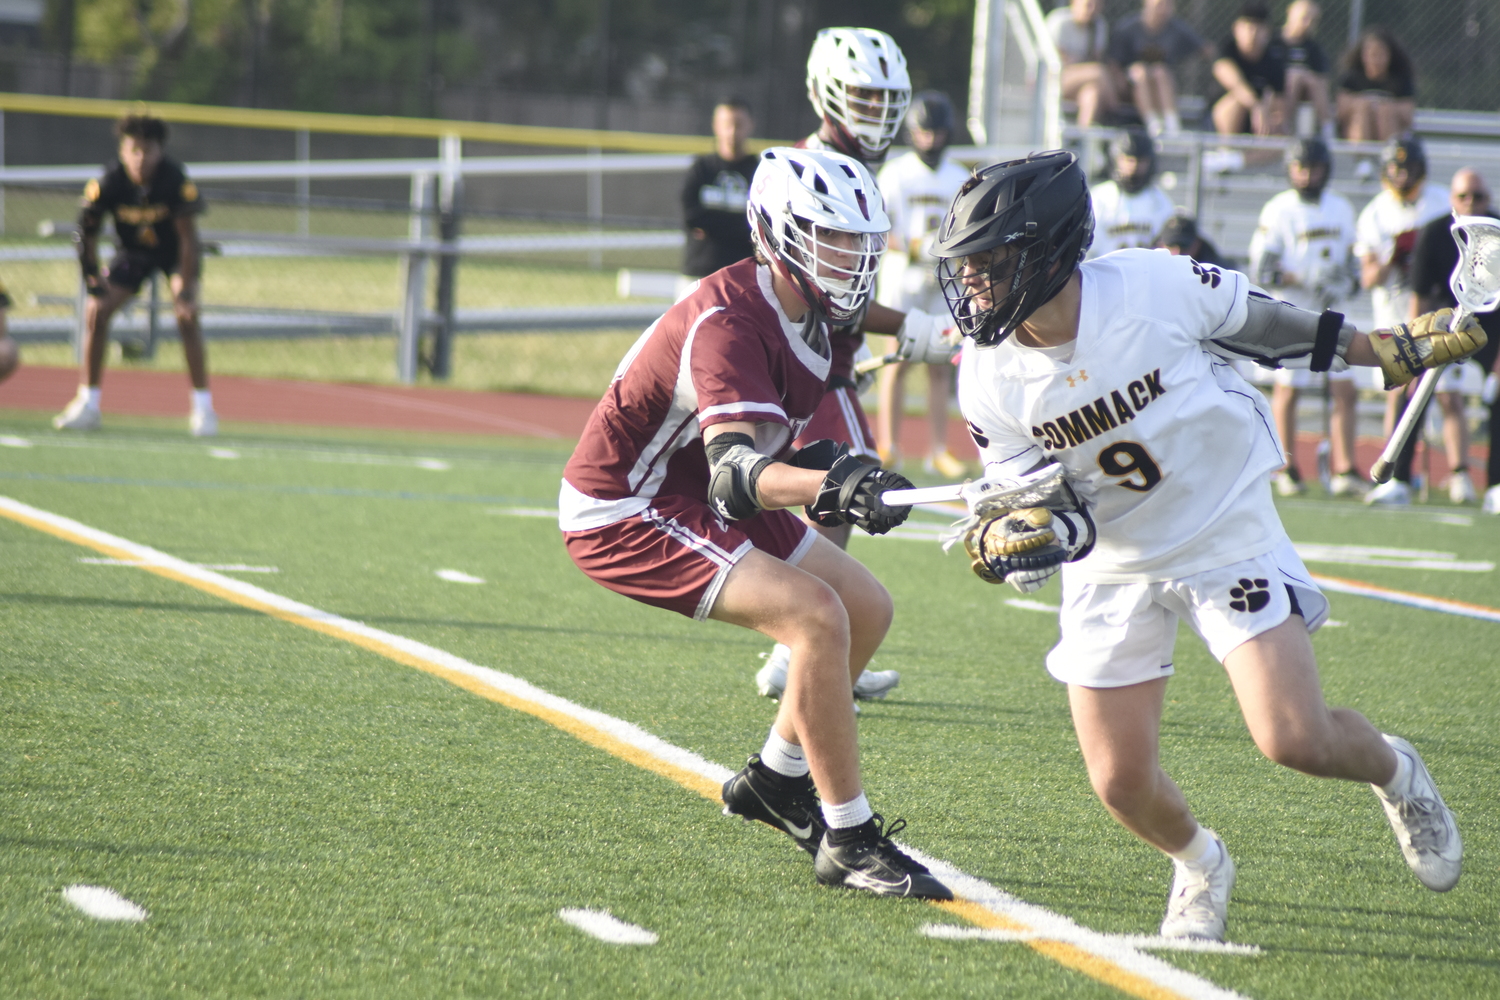 Southampton sophomore Nate Barbour defends against a Commack player. DREW BUDD